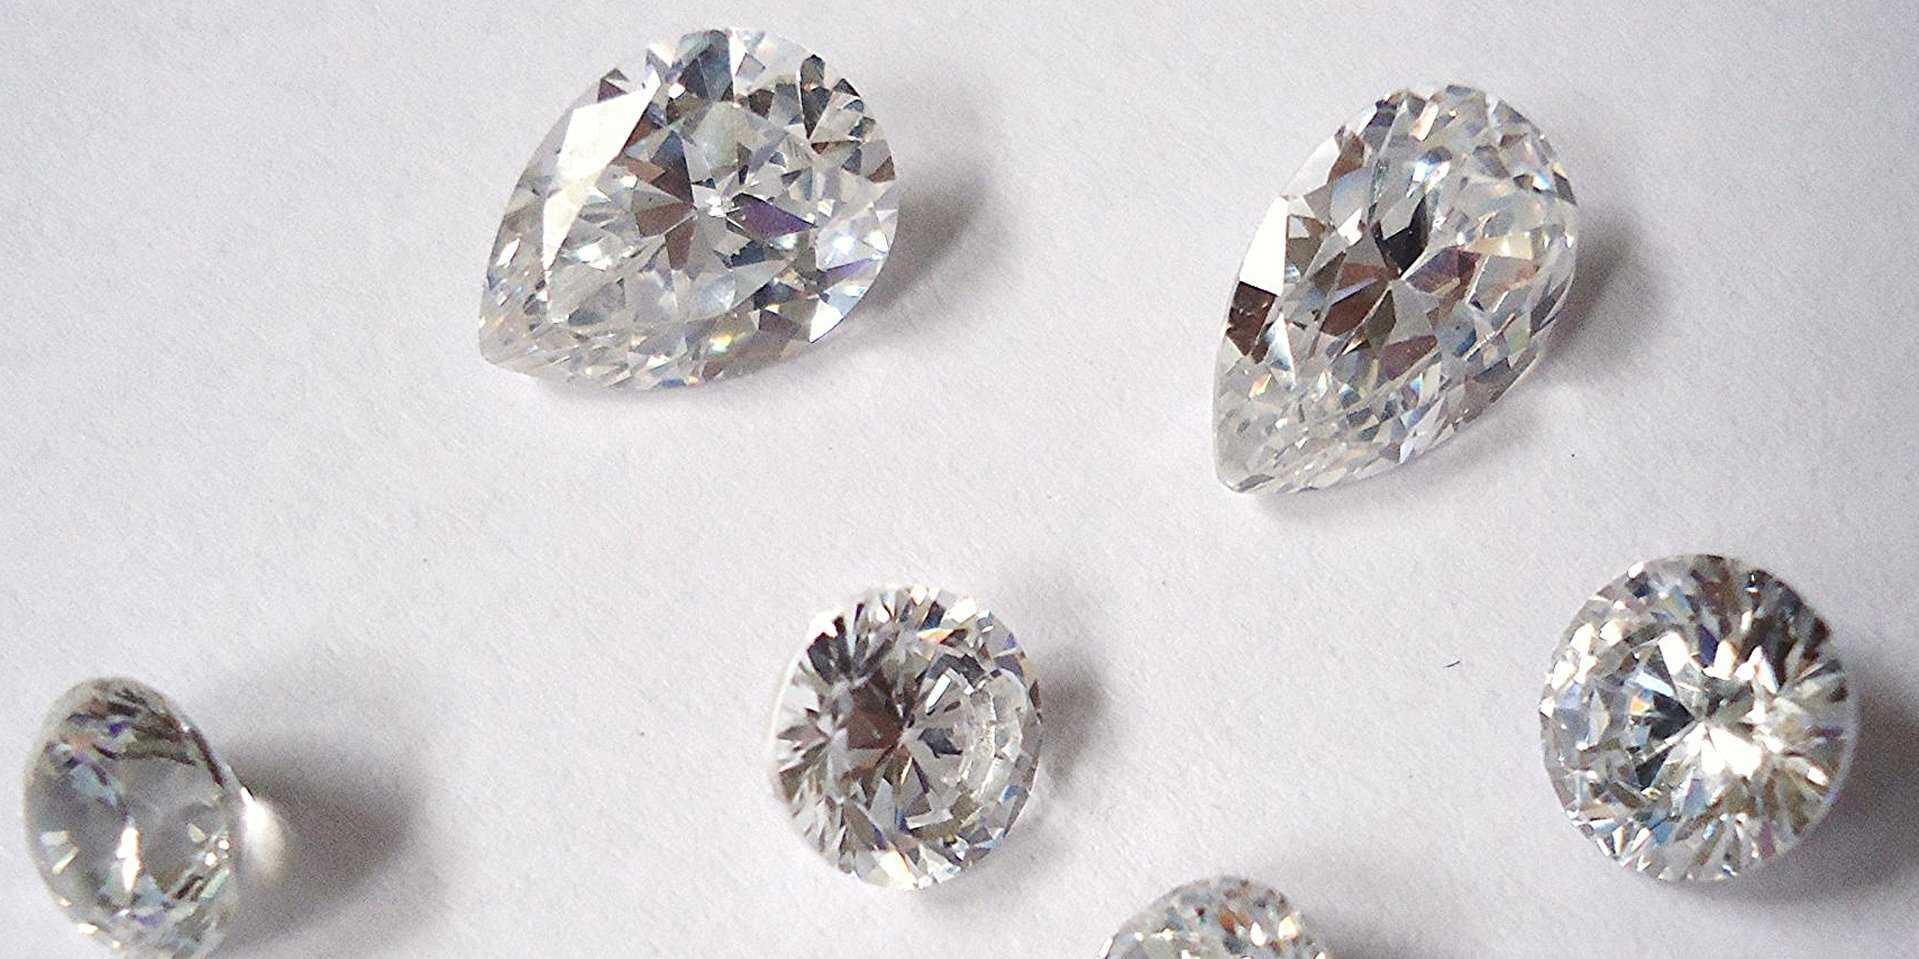 Know More About Real Diamond Cuts at https://www.diamondcuts.com